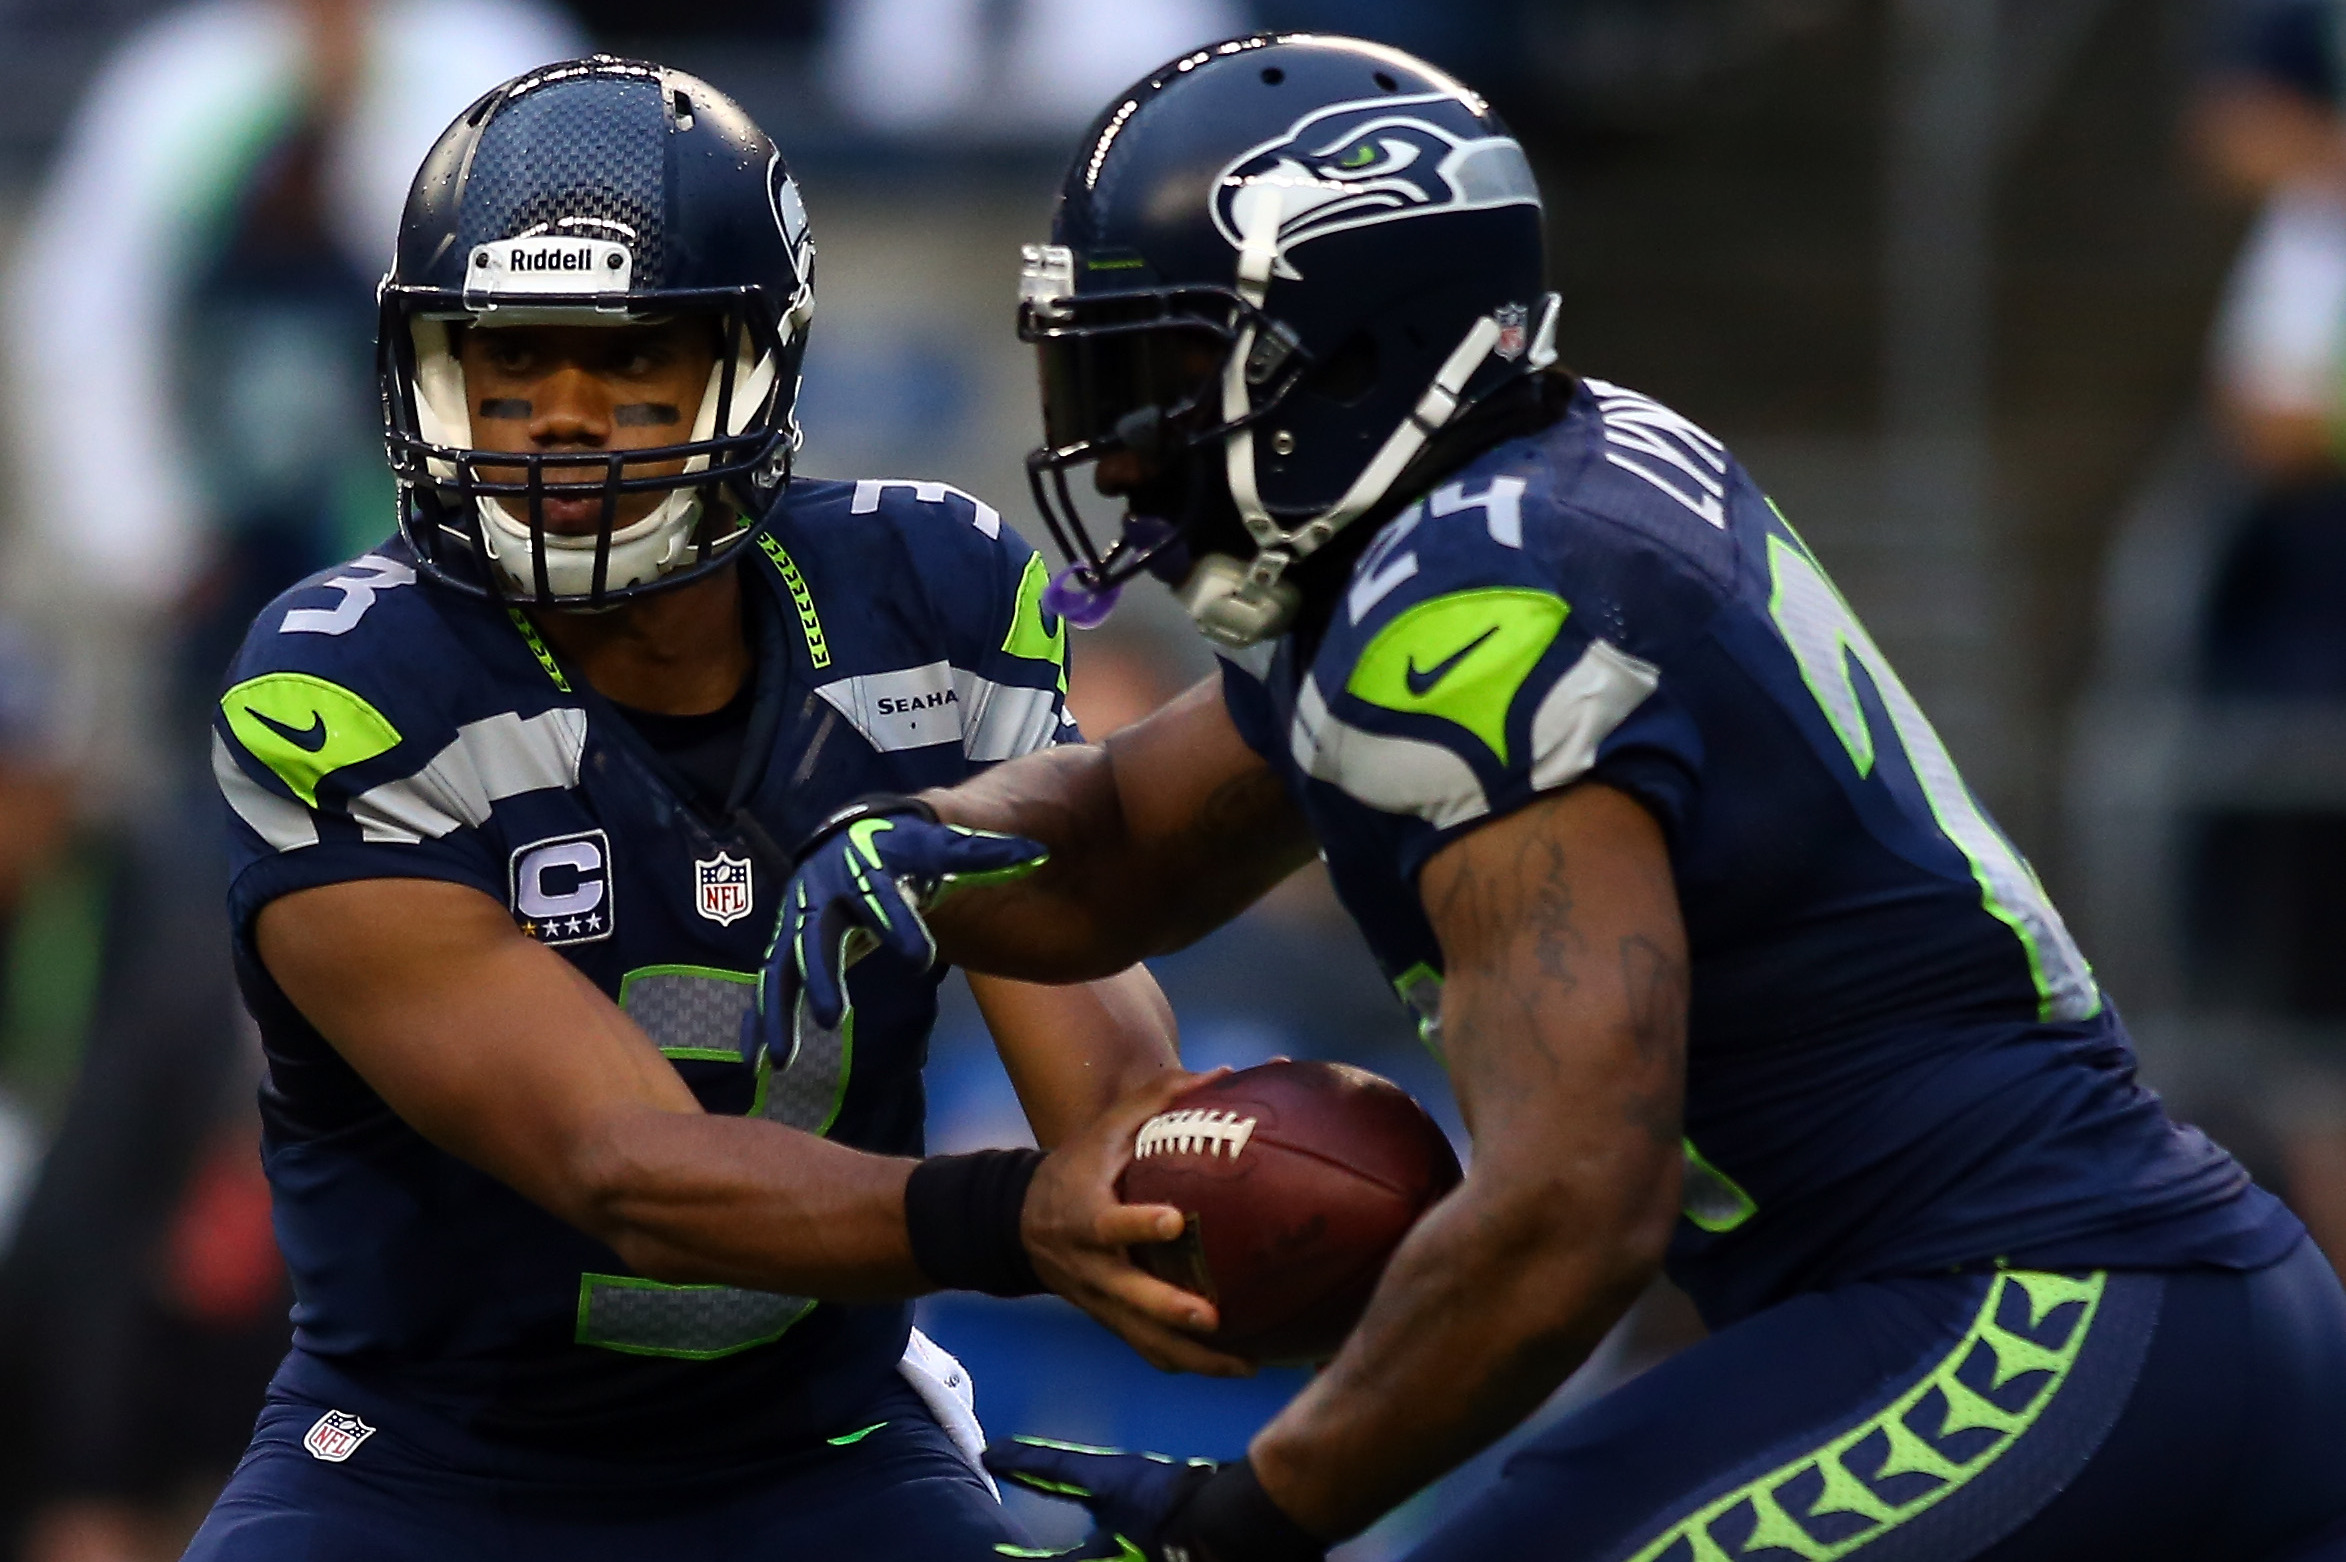 Seahawks injury update: Derrick Coleman and Jeron Johnson out 